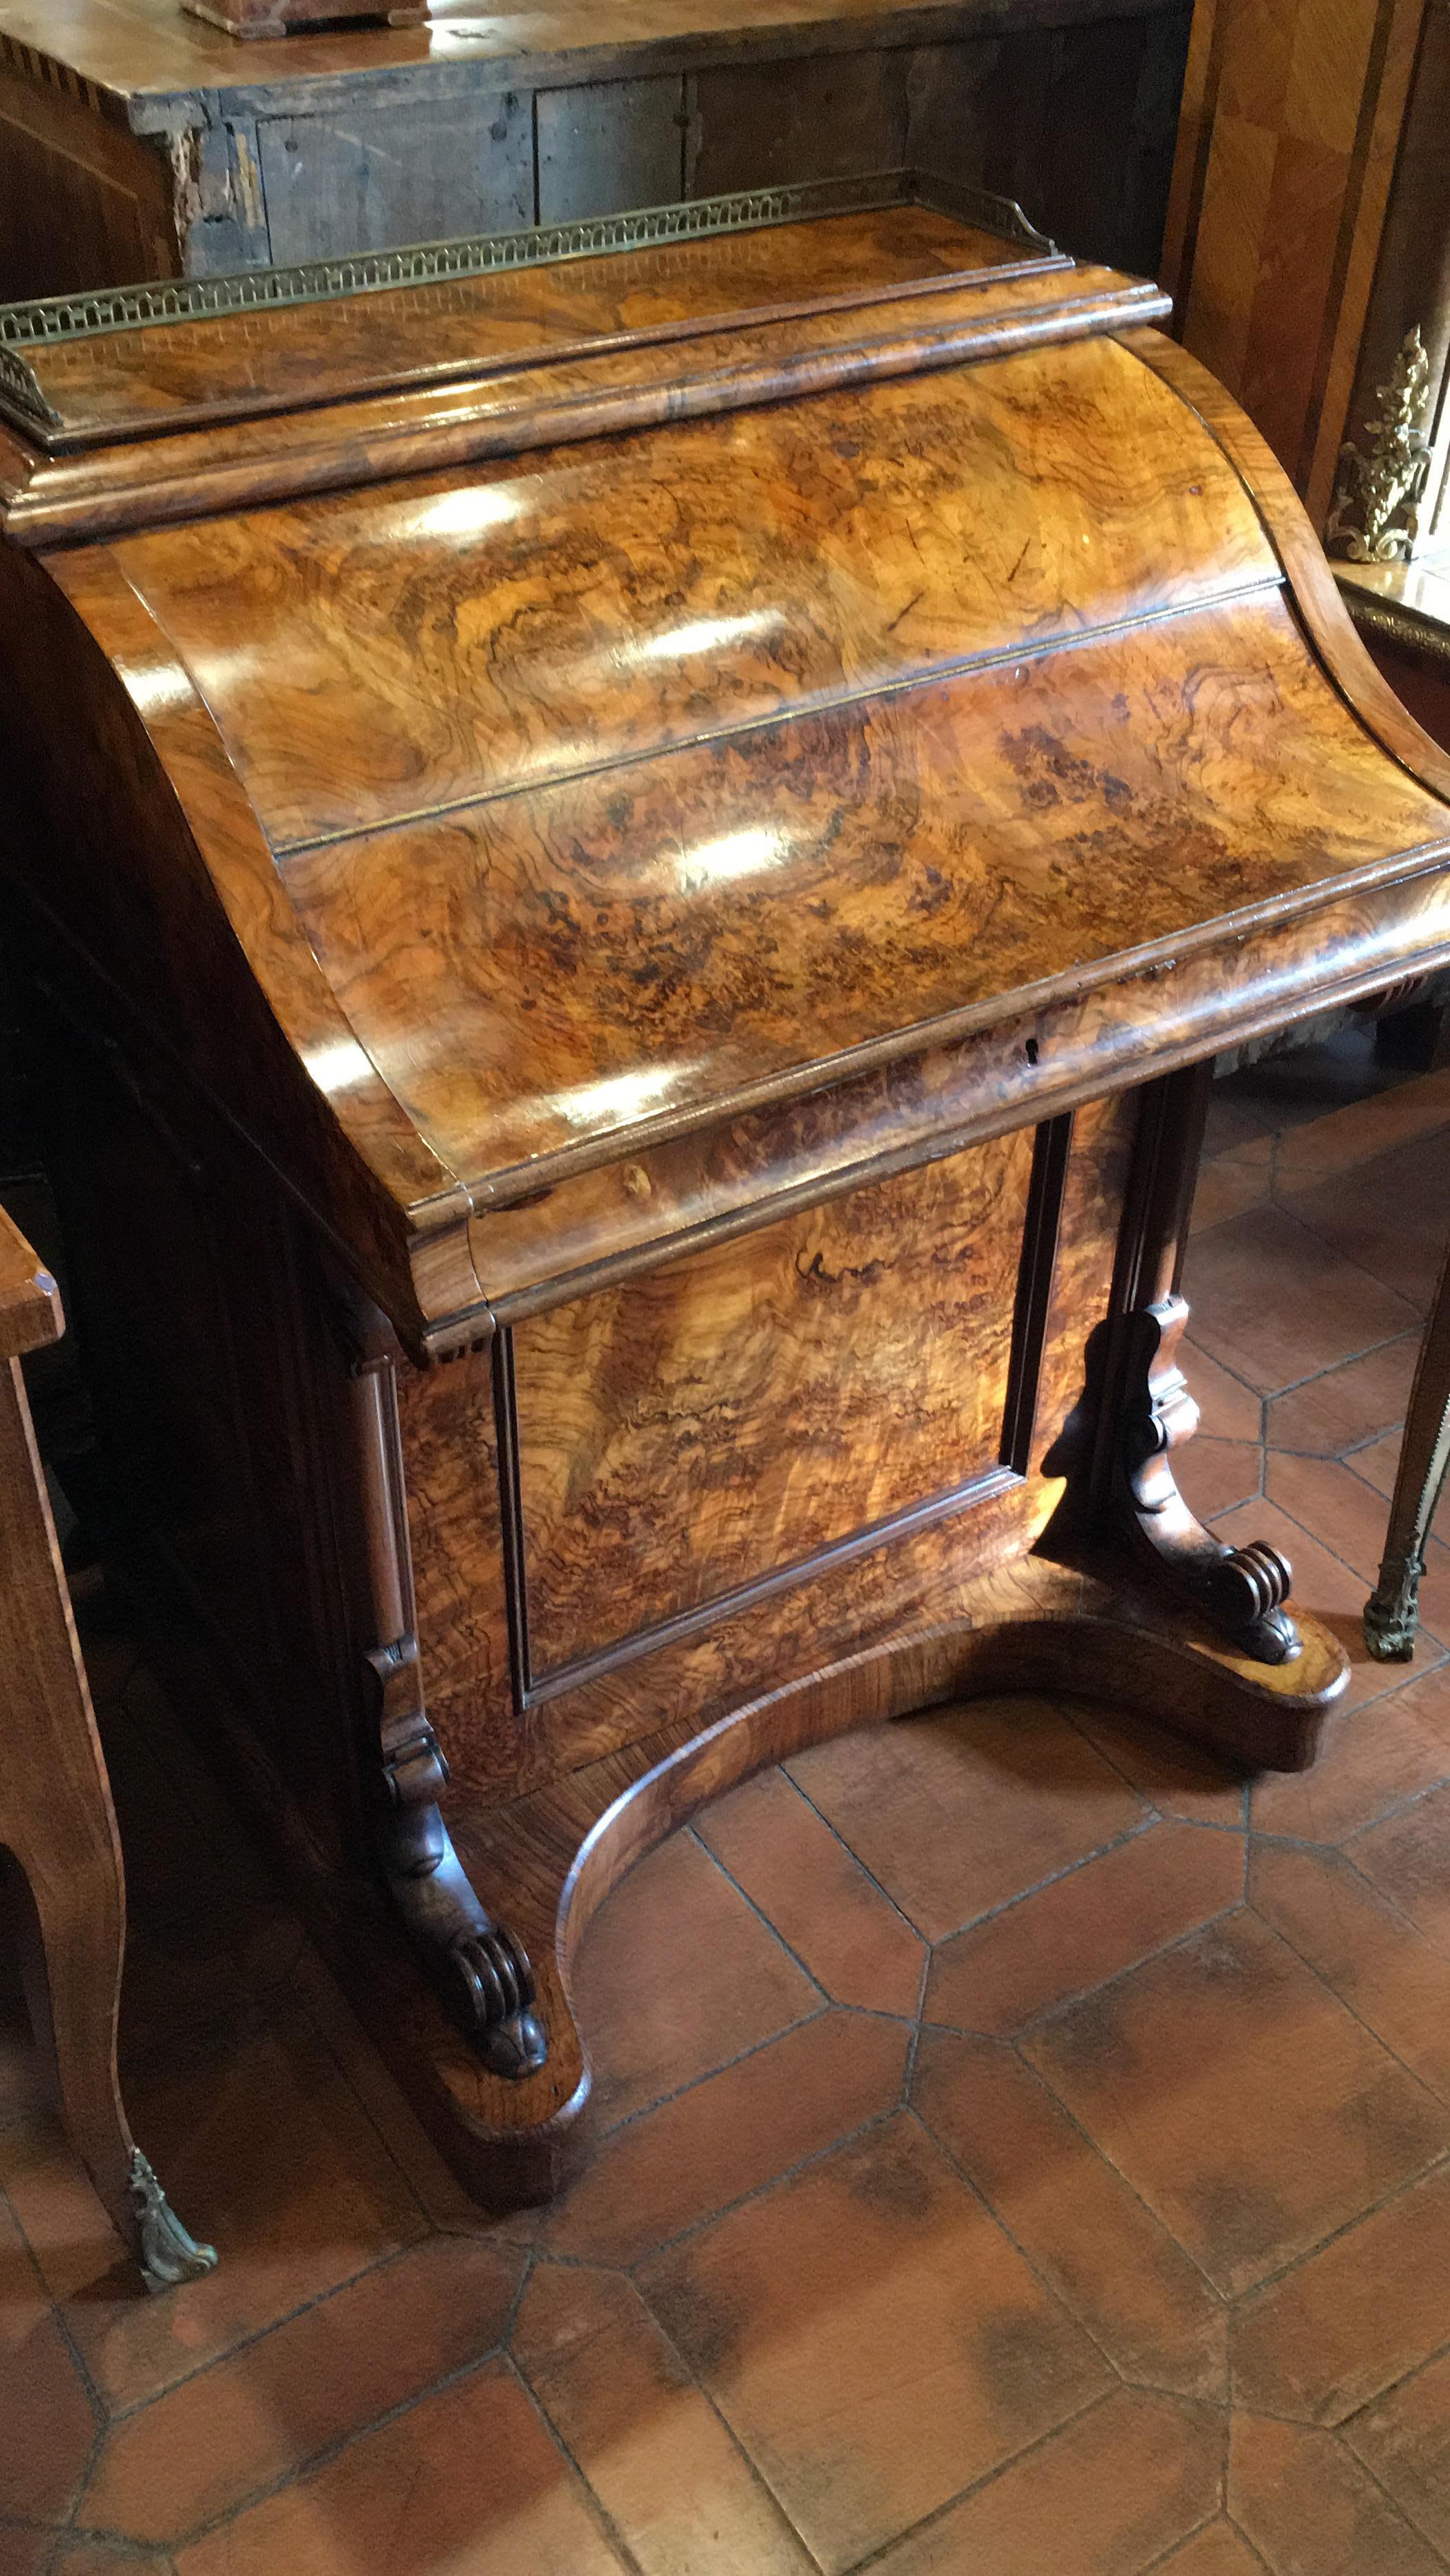 Fantastic Davenport, Victorian period, in walnut burl, superb quality with a game of veins that make the wood a painting, top with drawers with retractable mechanism. Another peculiarity, unlike the common davenport, is that both sides have openable